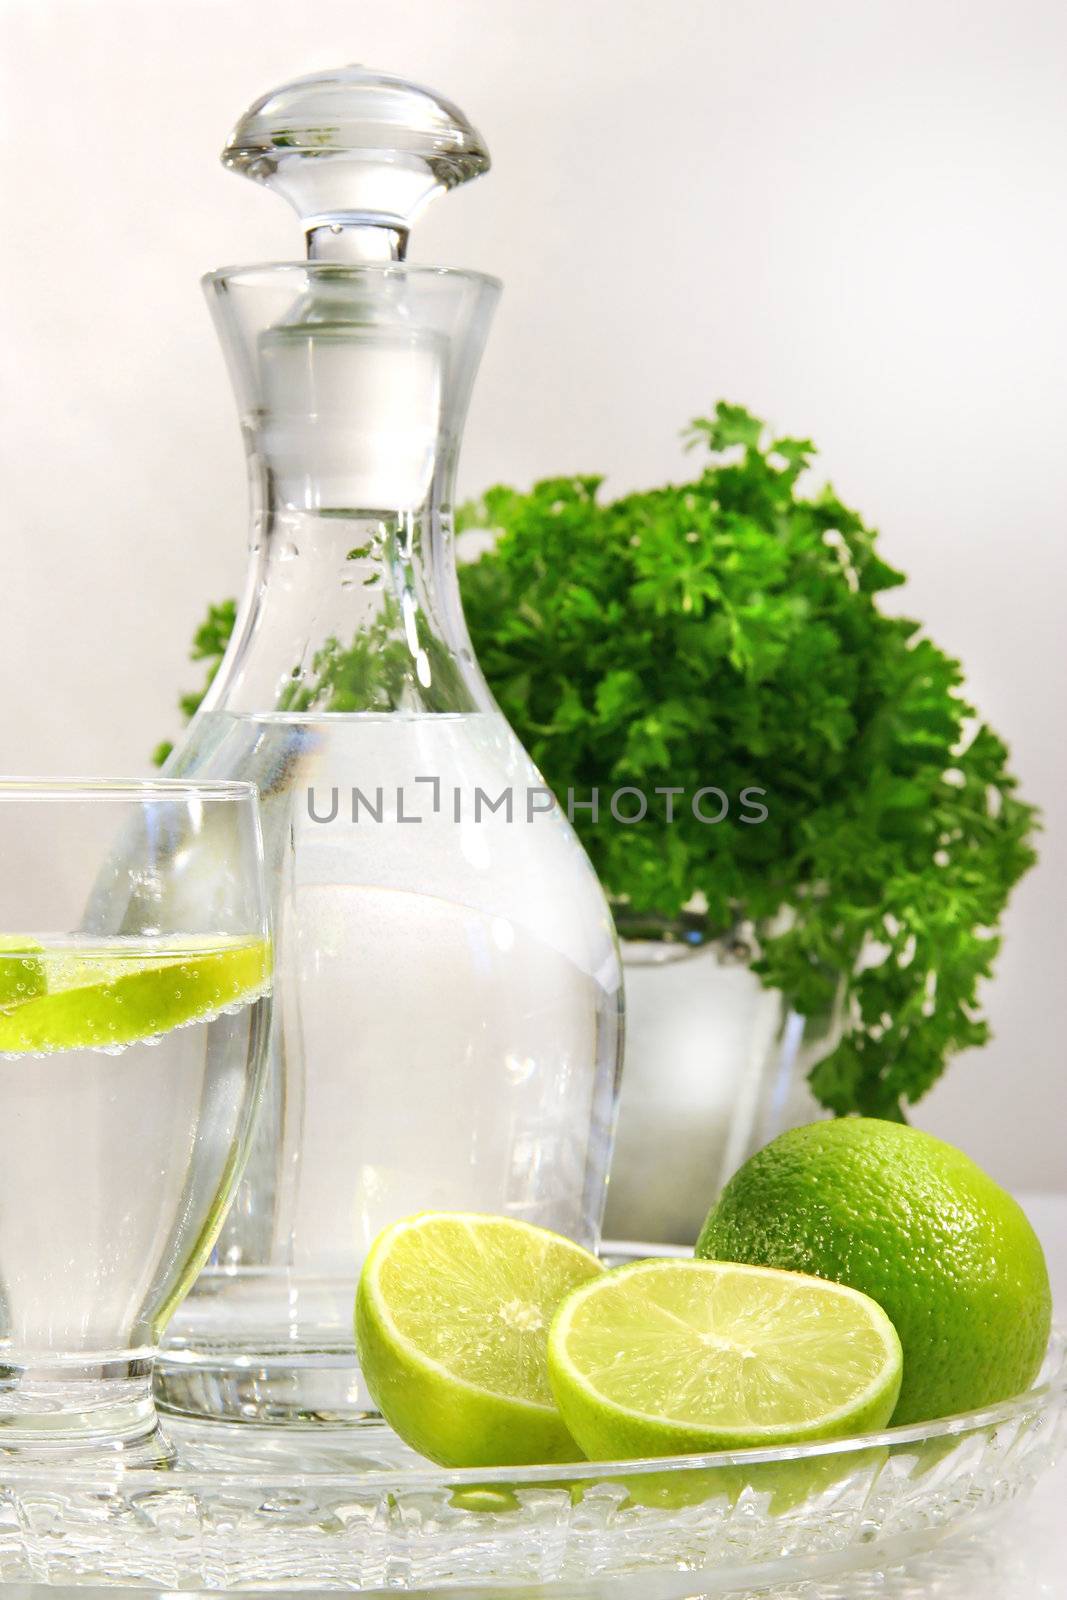 Fresh limes and water by Sandralise